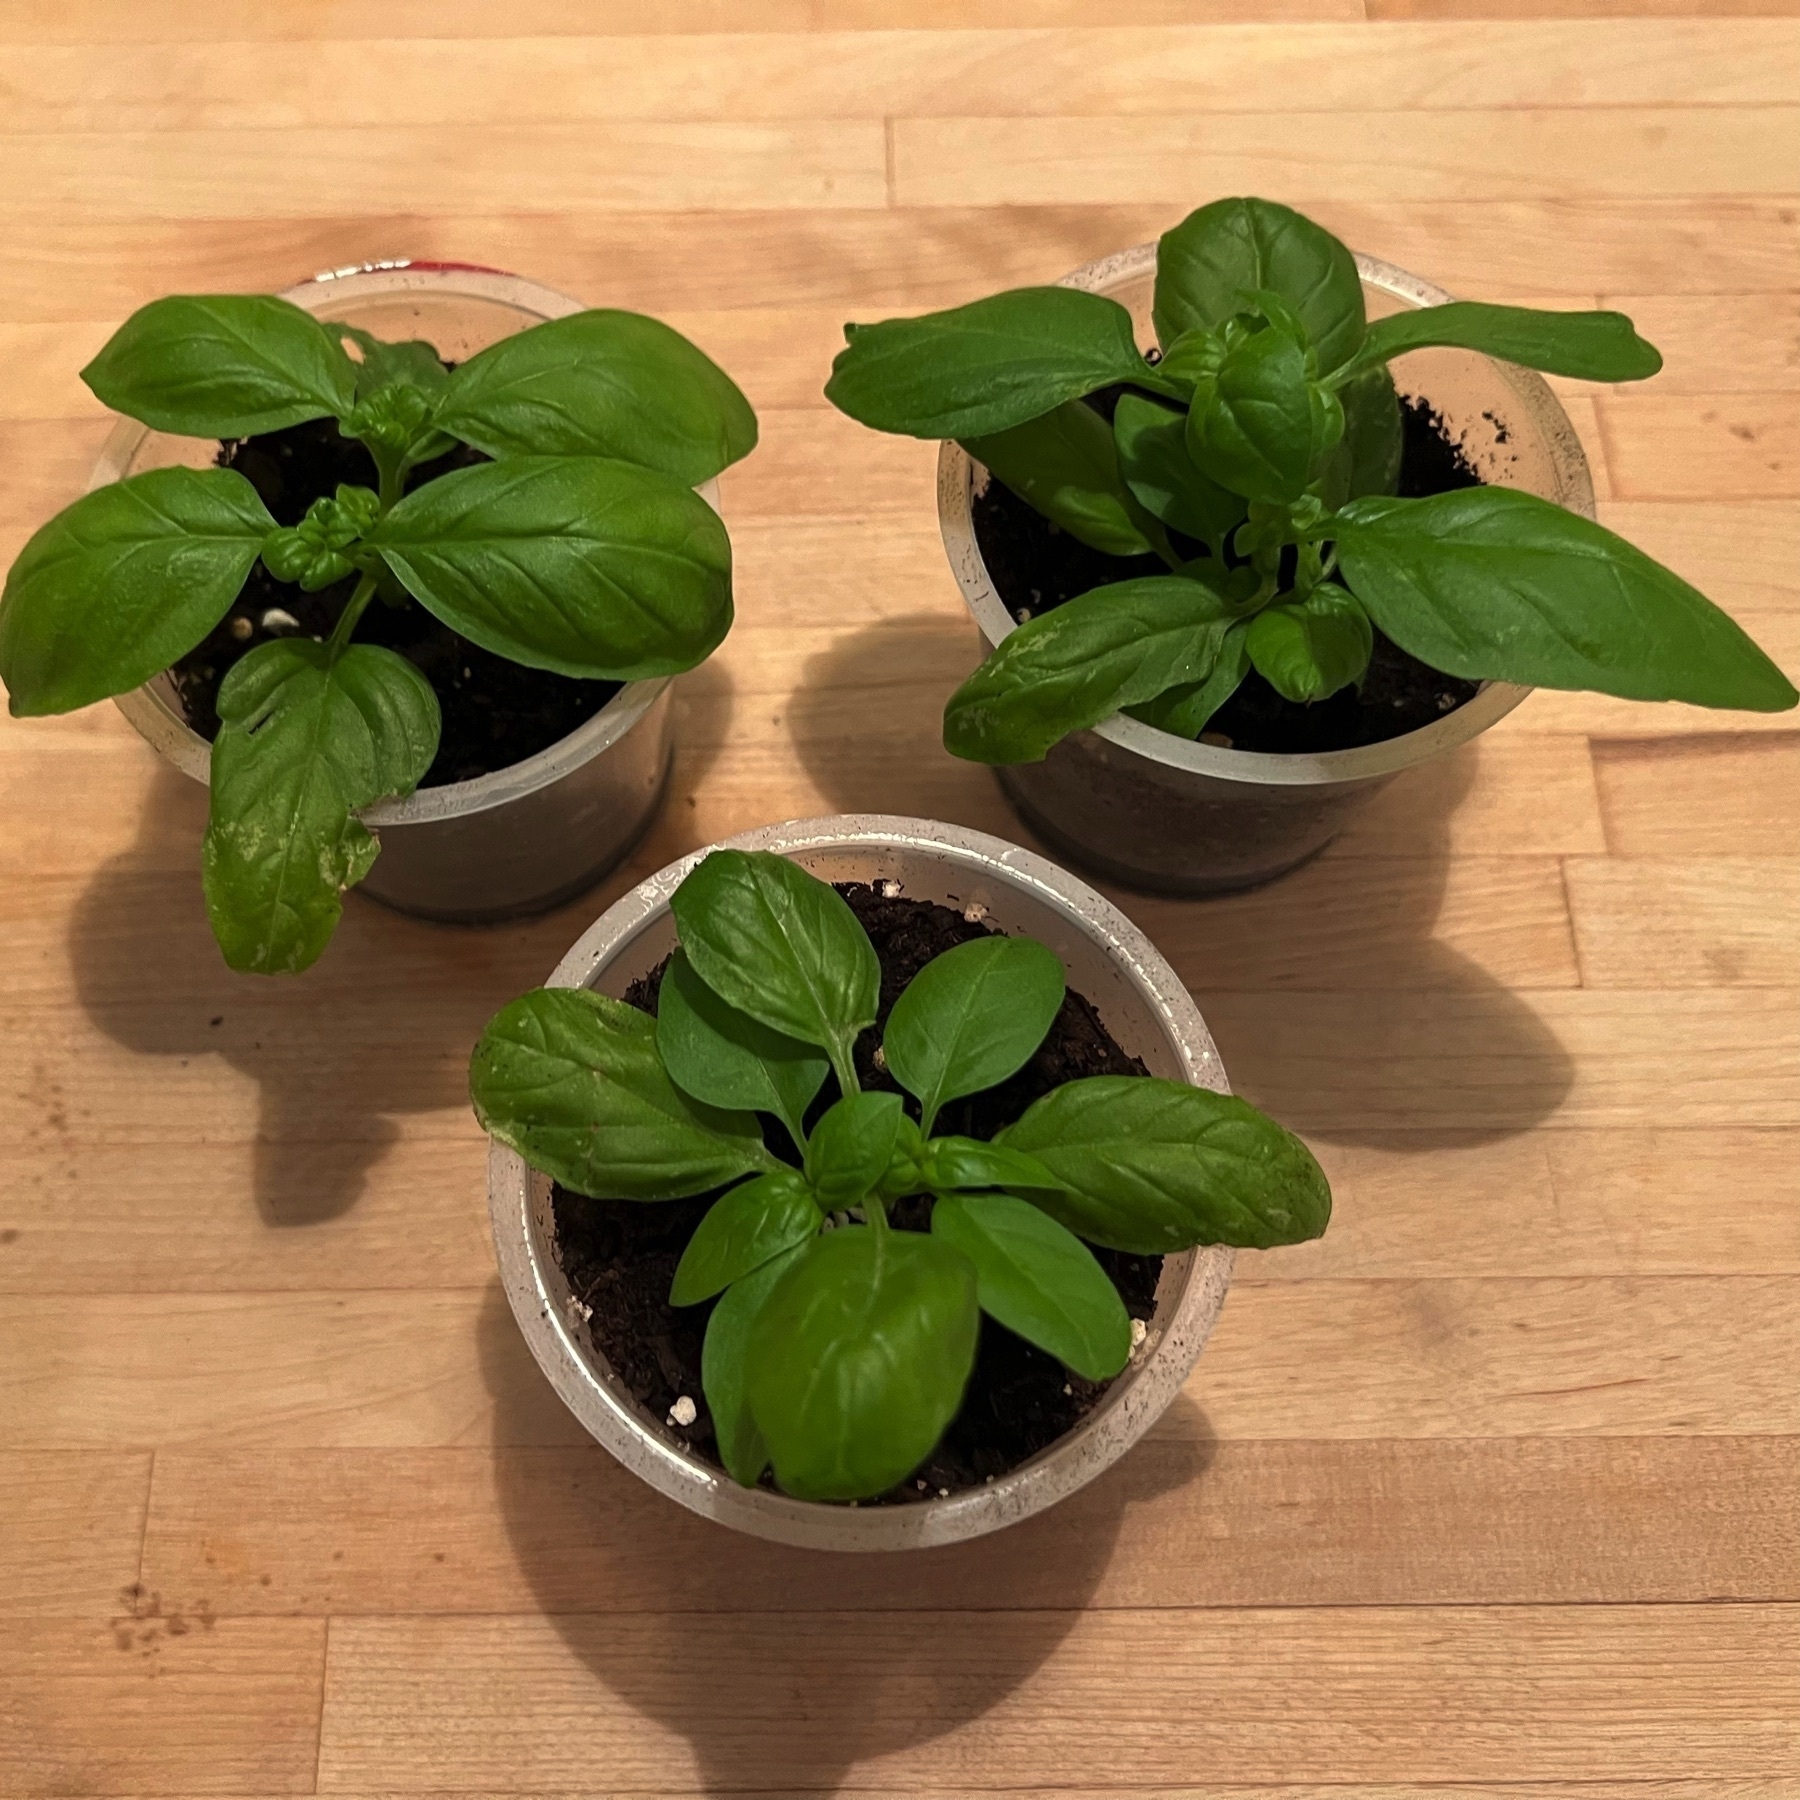 Picture of the three small basil plants in small cups, against a wood counter background